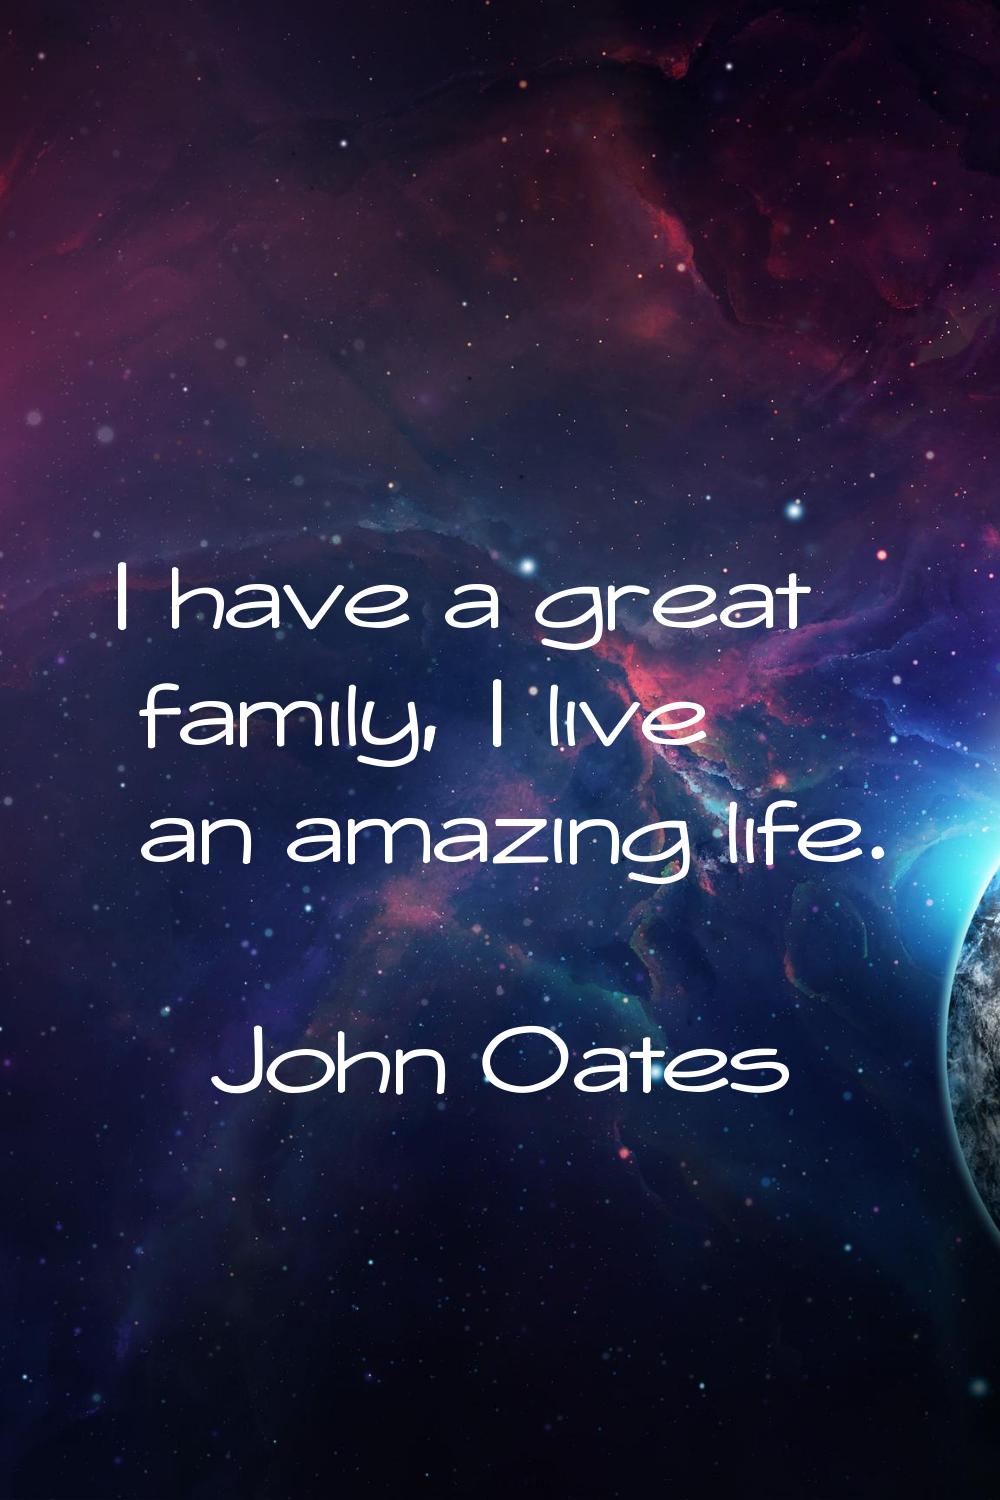 I have a great family, I live an amazing life.